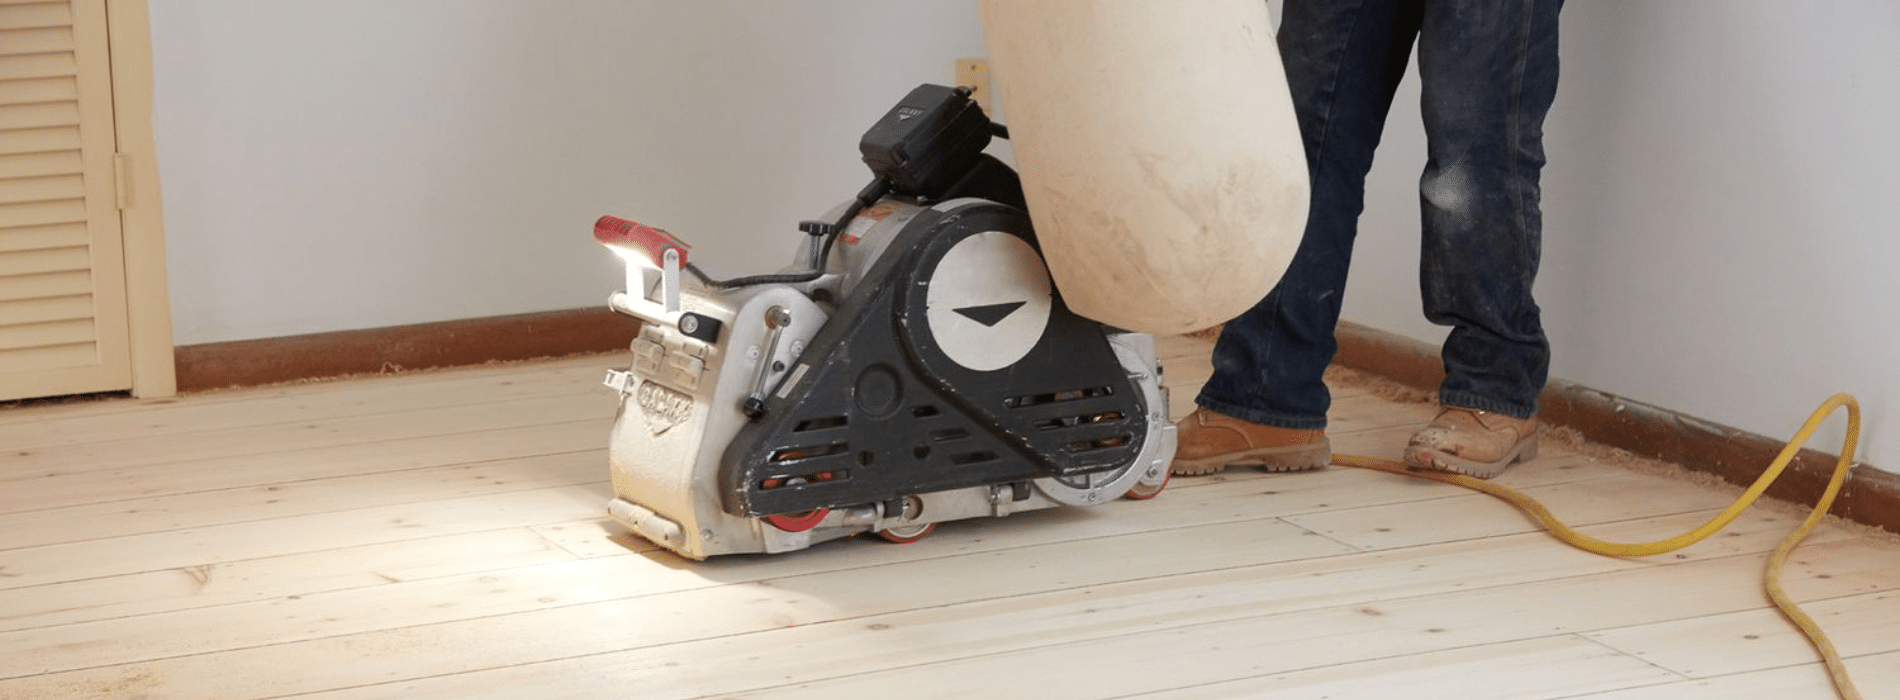 Mr Sander® showcase their expertise in sanding a herringbone floor using a Bona Scorpion drum sander in Yeading, UB4. This 200 mm powerhouse, with a 1.5 kW effect, operates at 240 V and 50 Hz. The process includes a dust extraction system with a HEPA filter, ensuring a clean and efficient outcome.